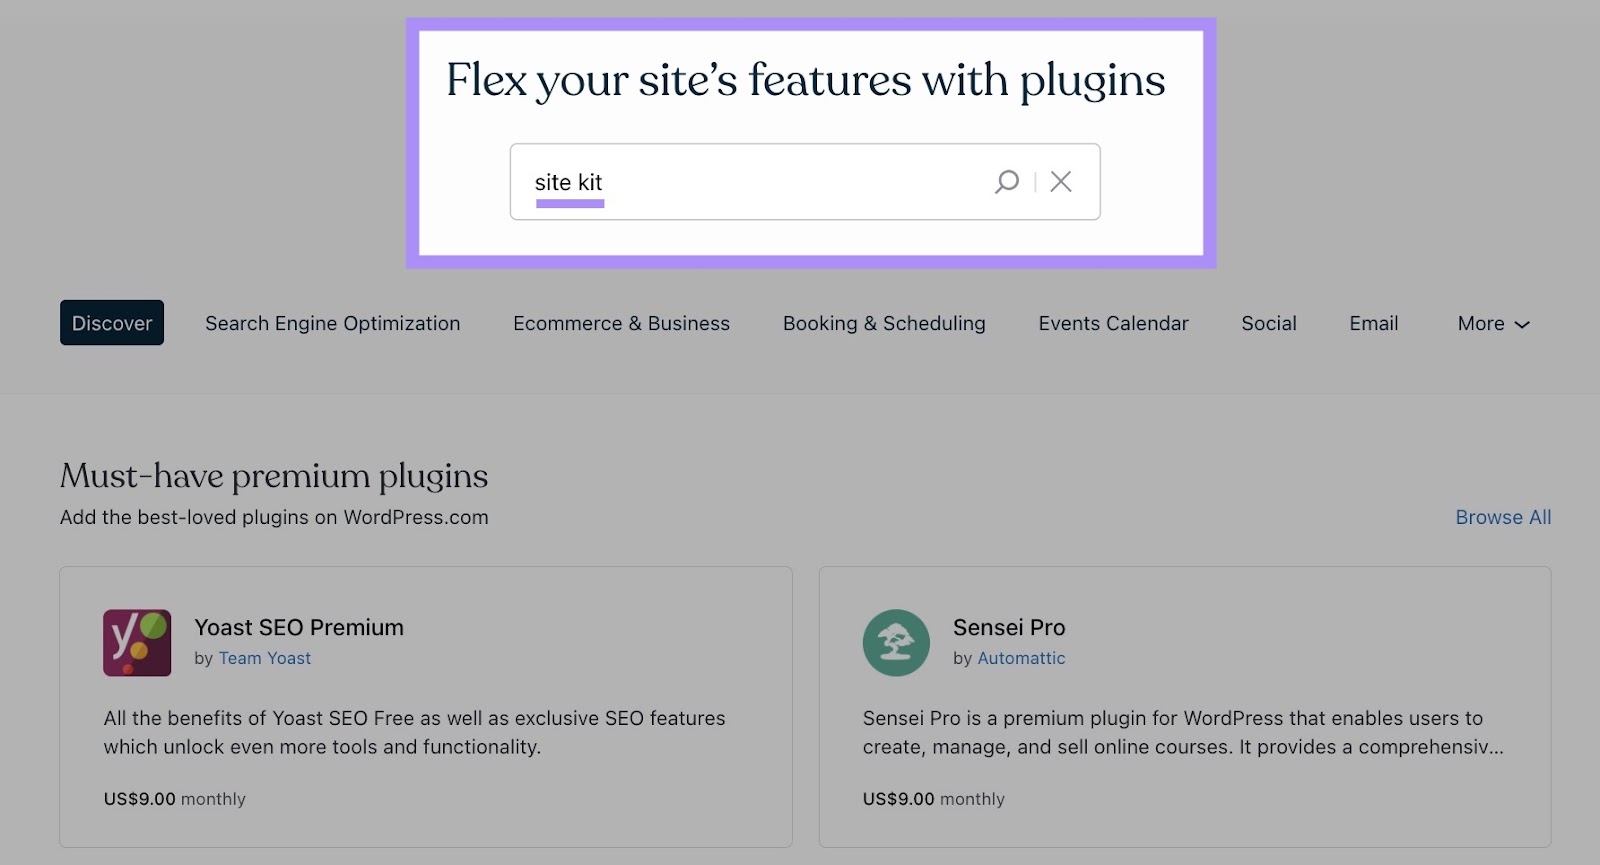 Search for "site kit" on the "Add Plugins" page in WordPress